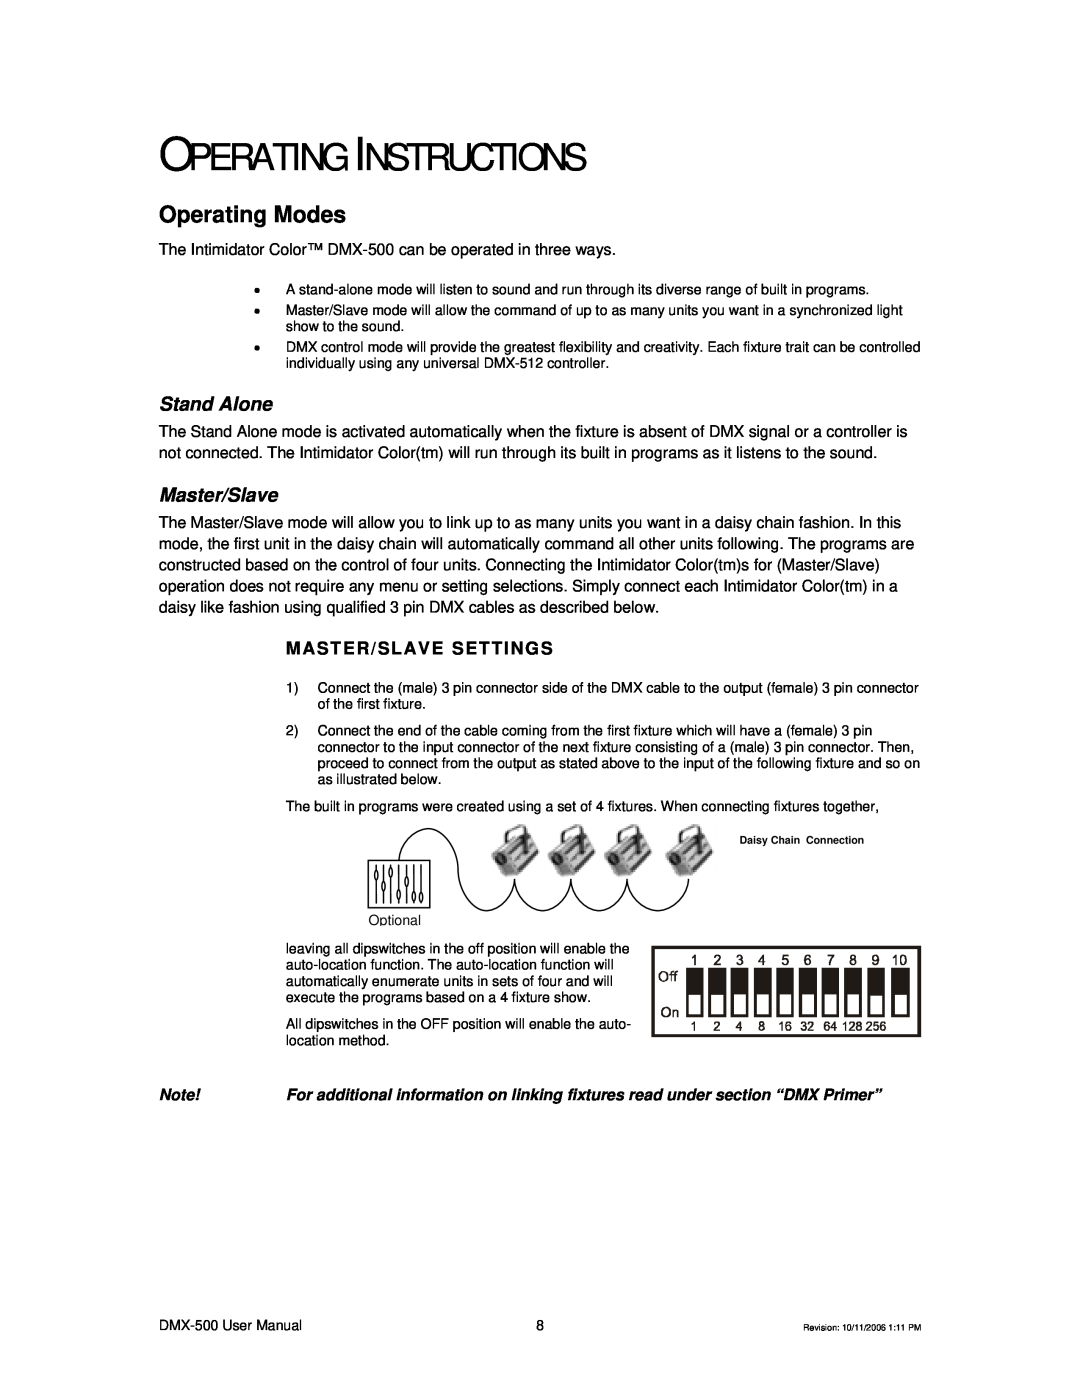 Chauvet DMX-500 user manual Operating Instructions, Operating Modes, Stand Alone, Master/Slave Settings 